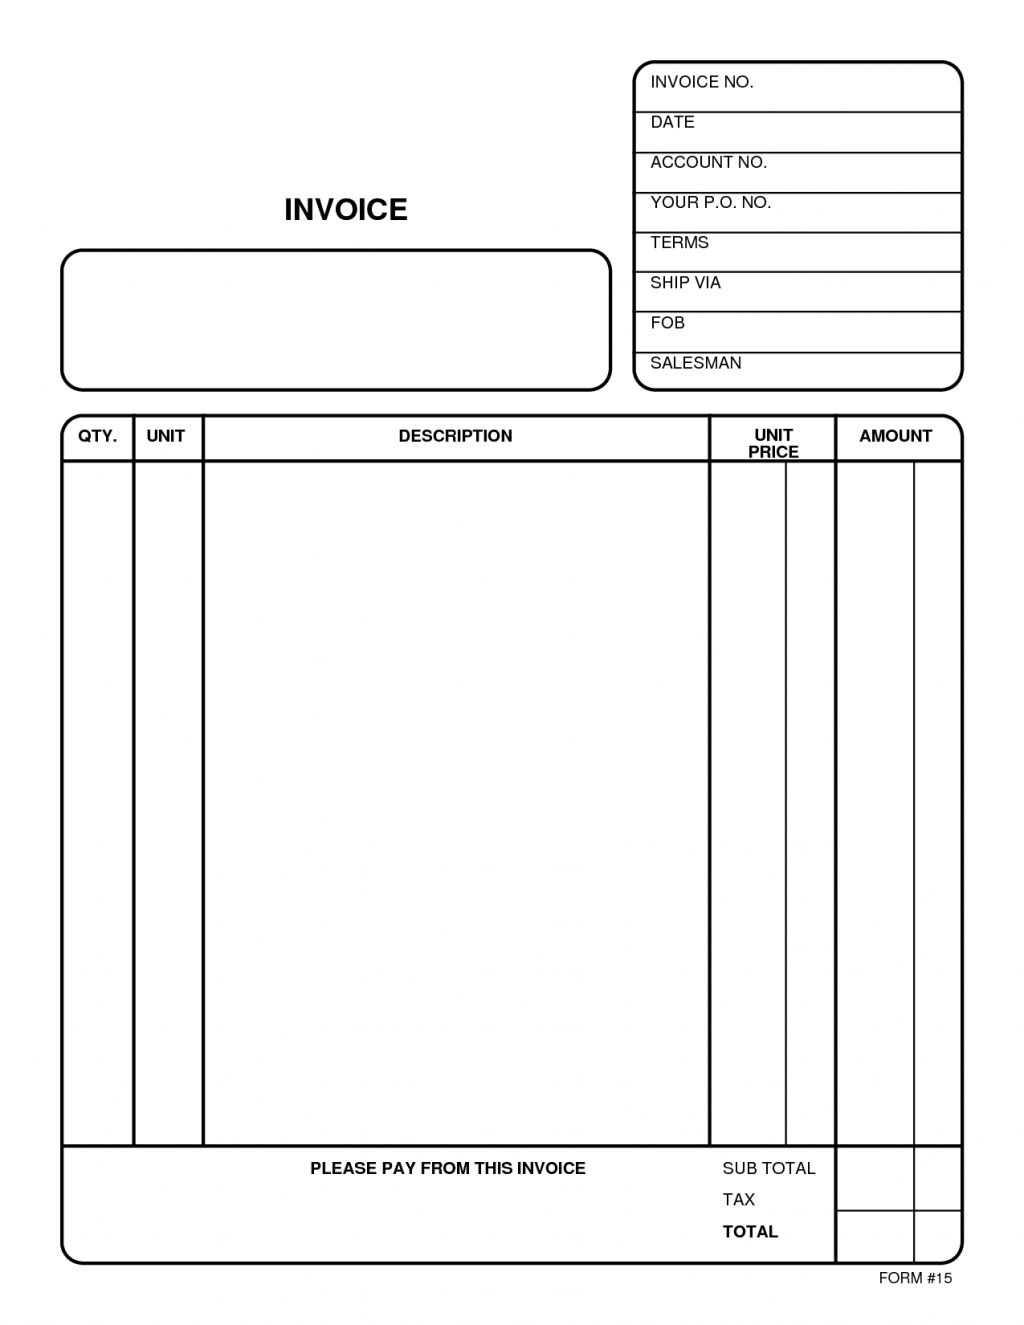 online invoice service printable invoice template invoice free online